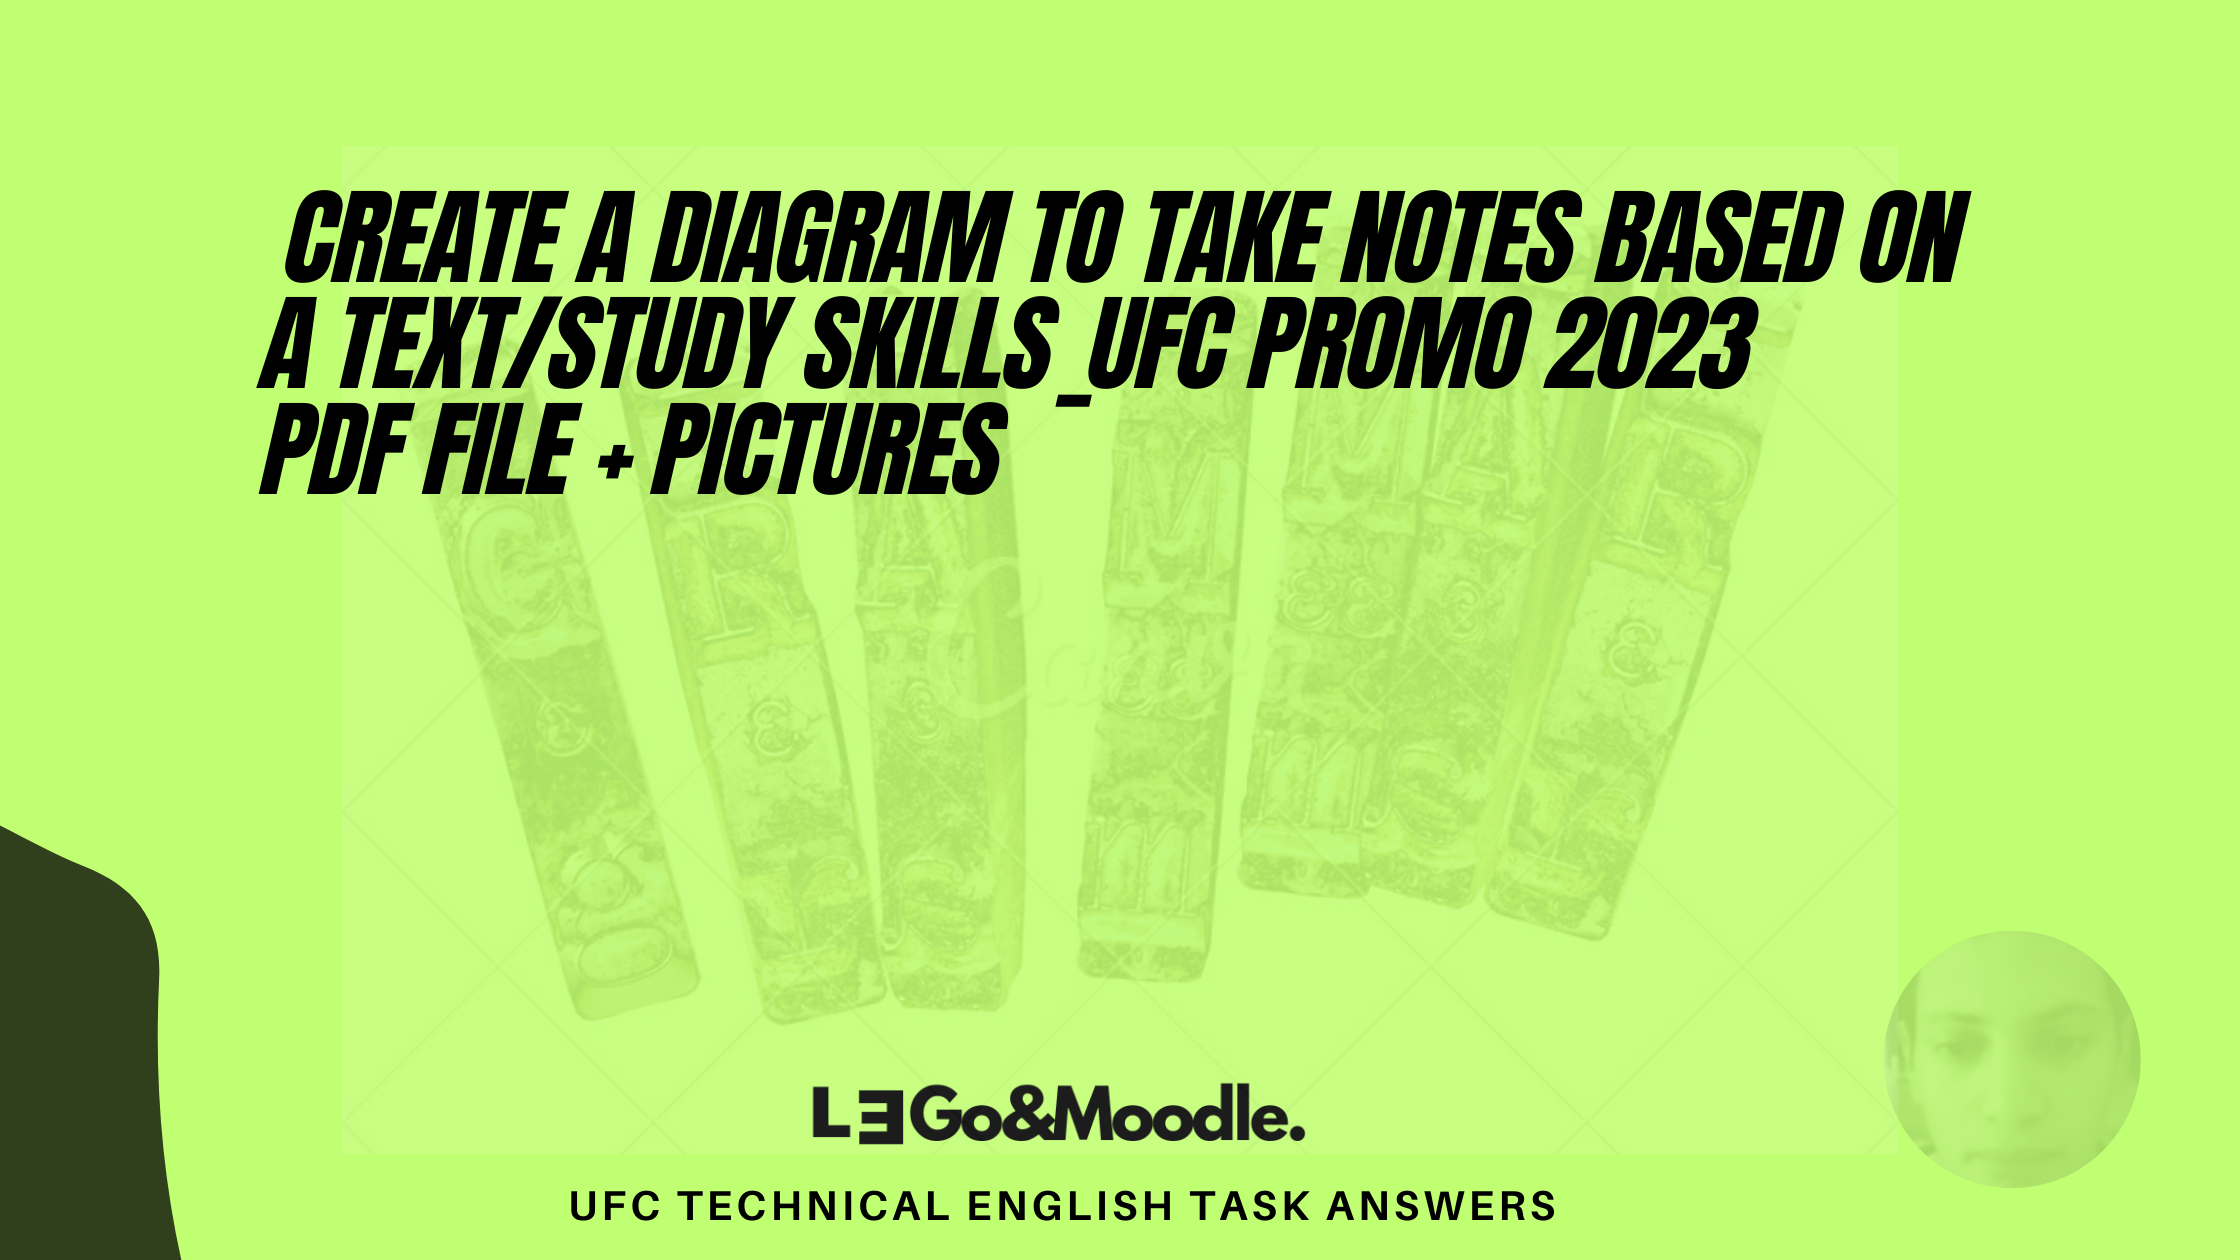 Create a Diagram to take notes based on a text/study skills_ufc promo 2023